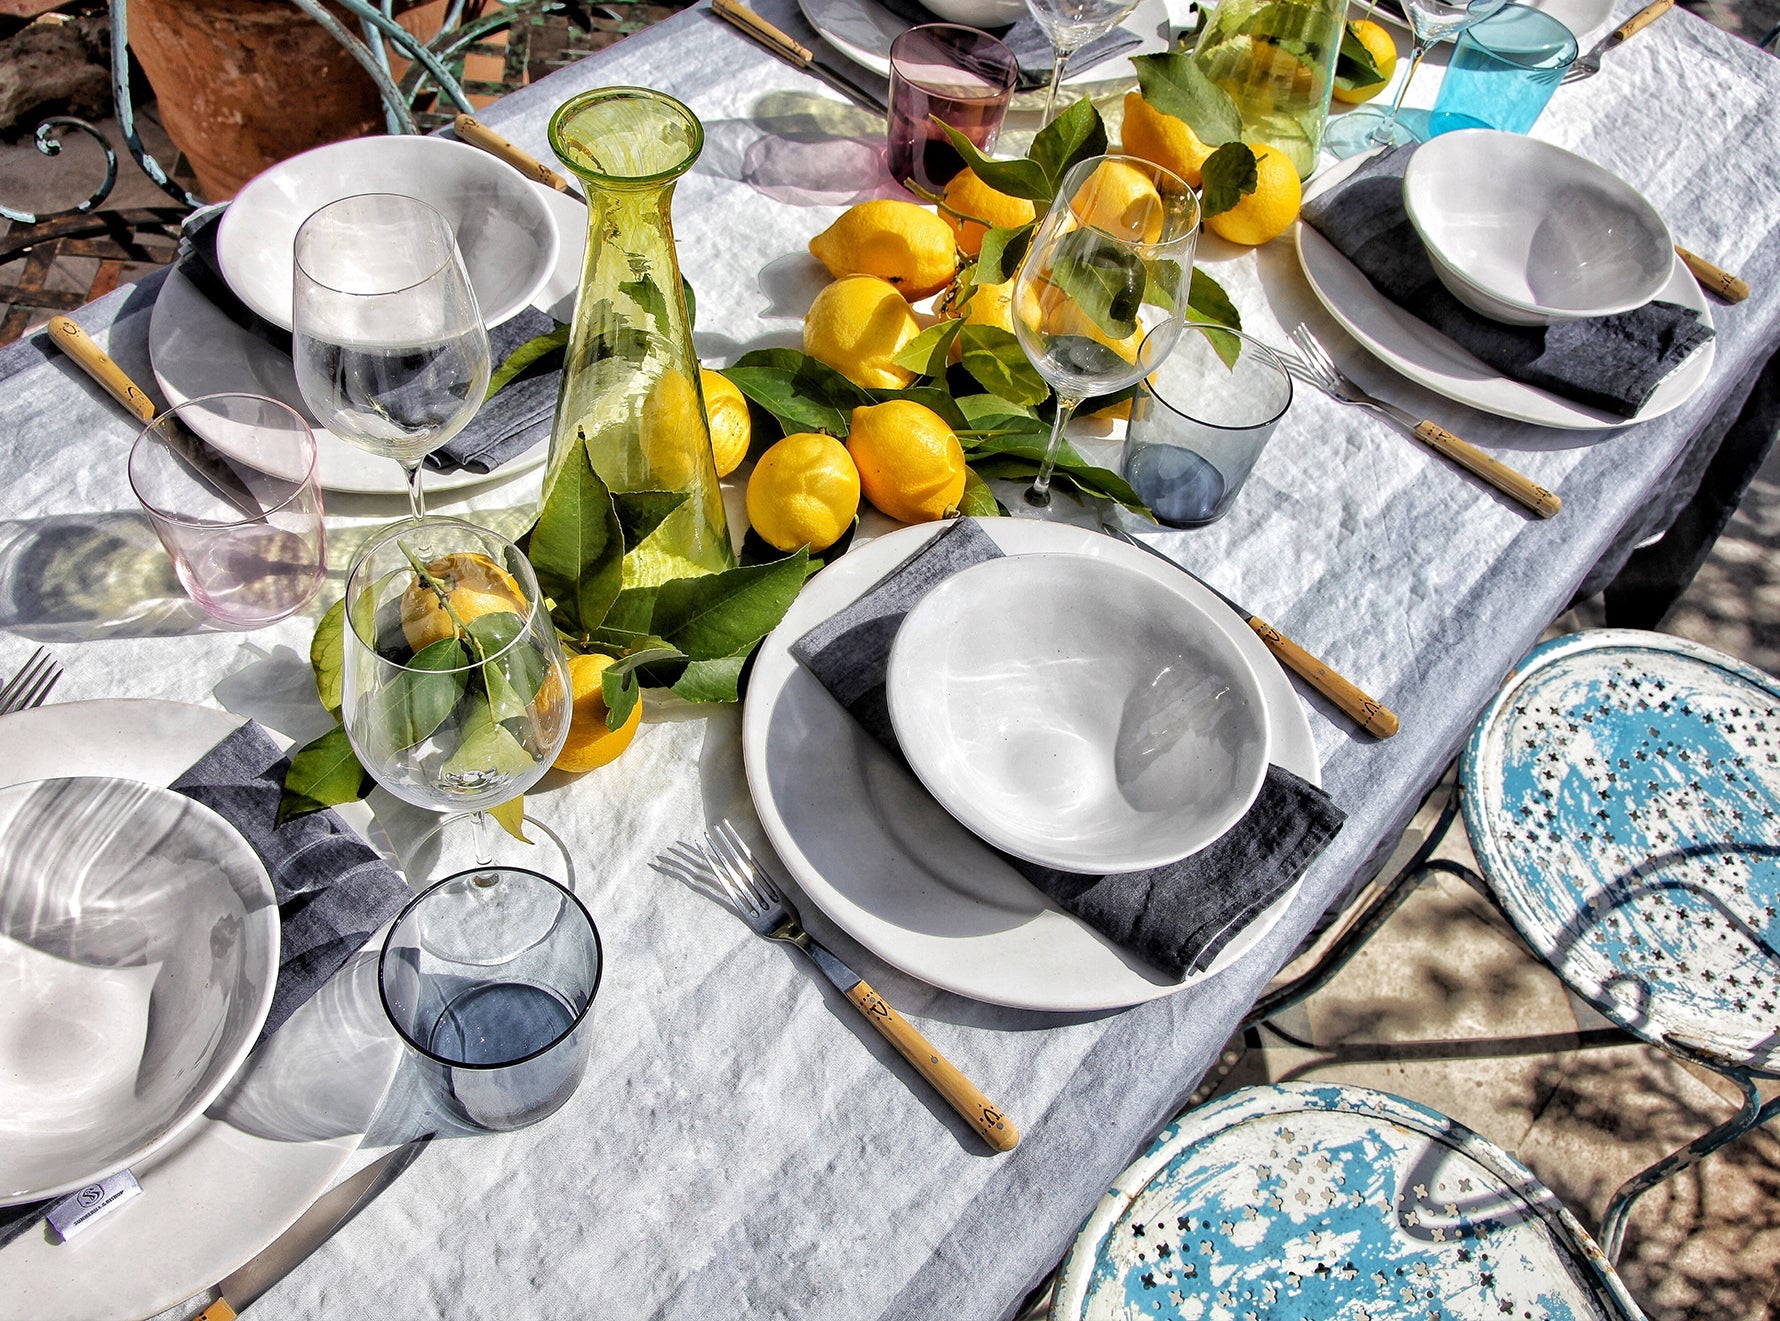 Shades Of Light Striped Linen Tablecloth